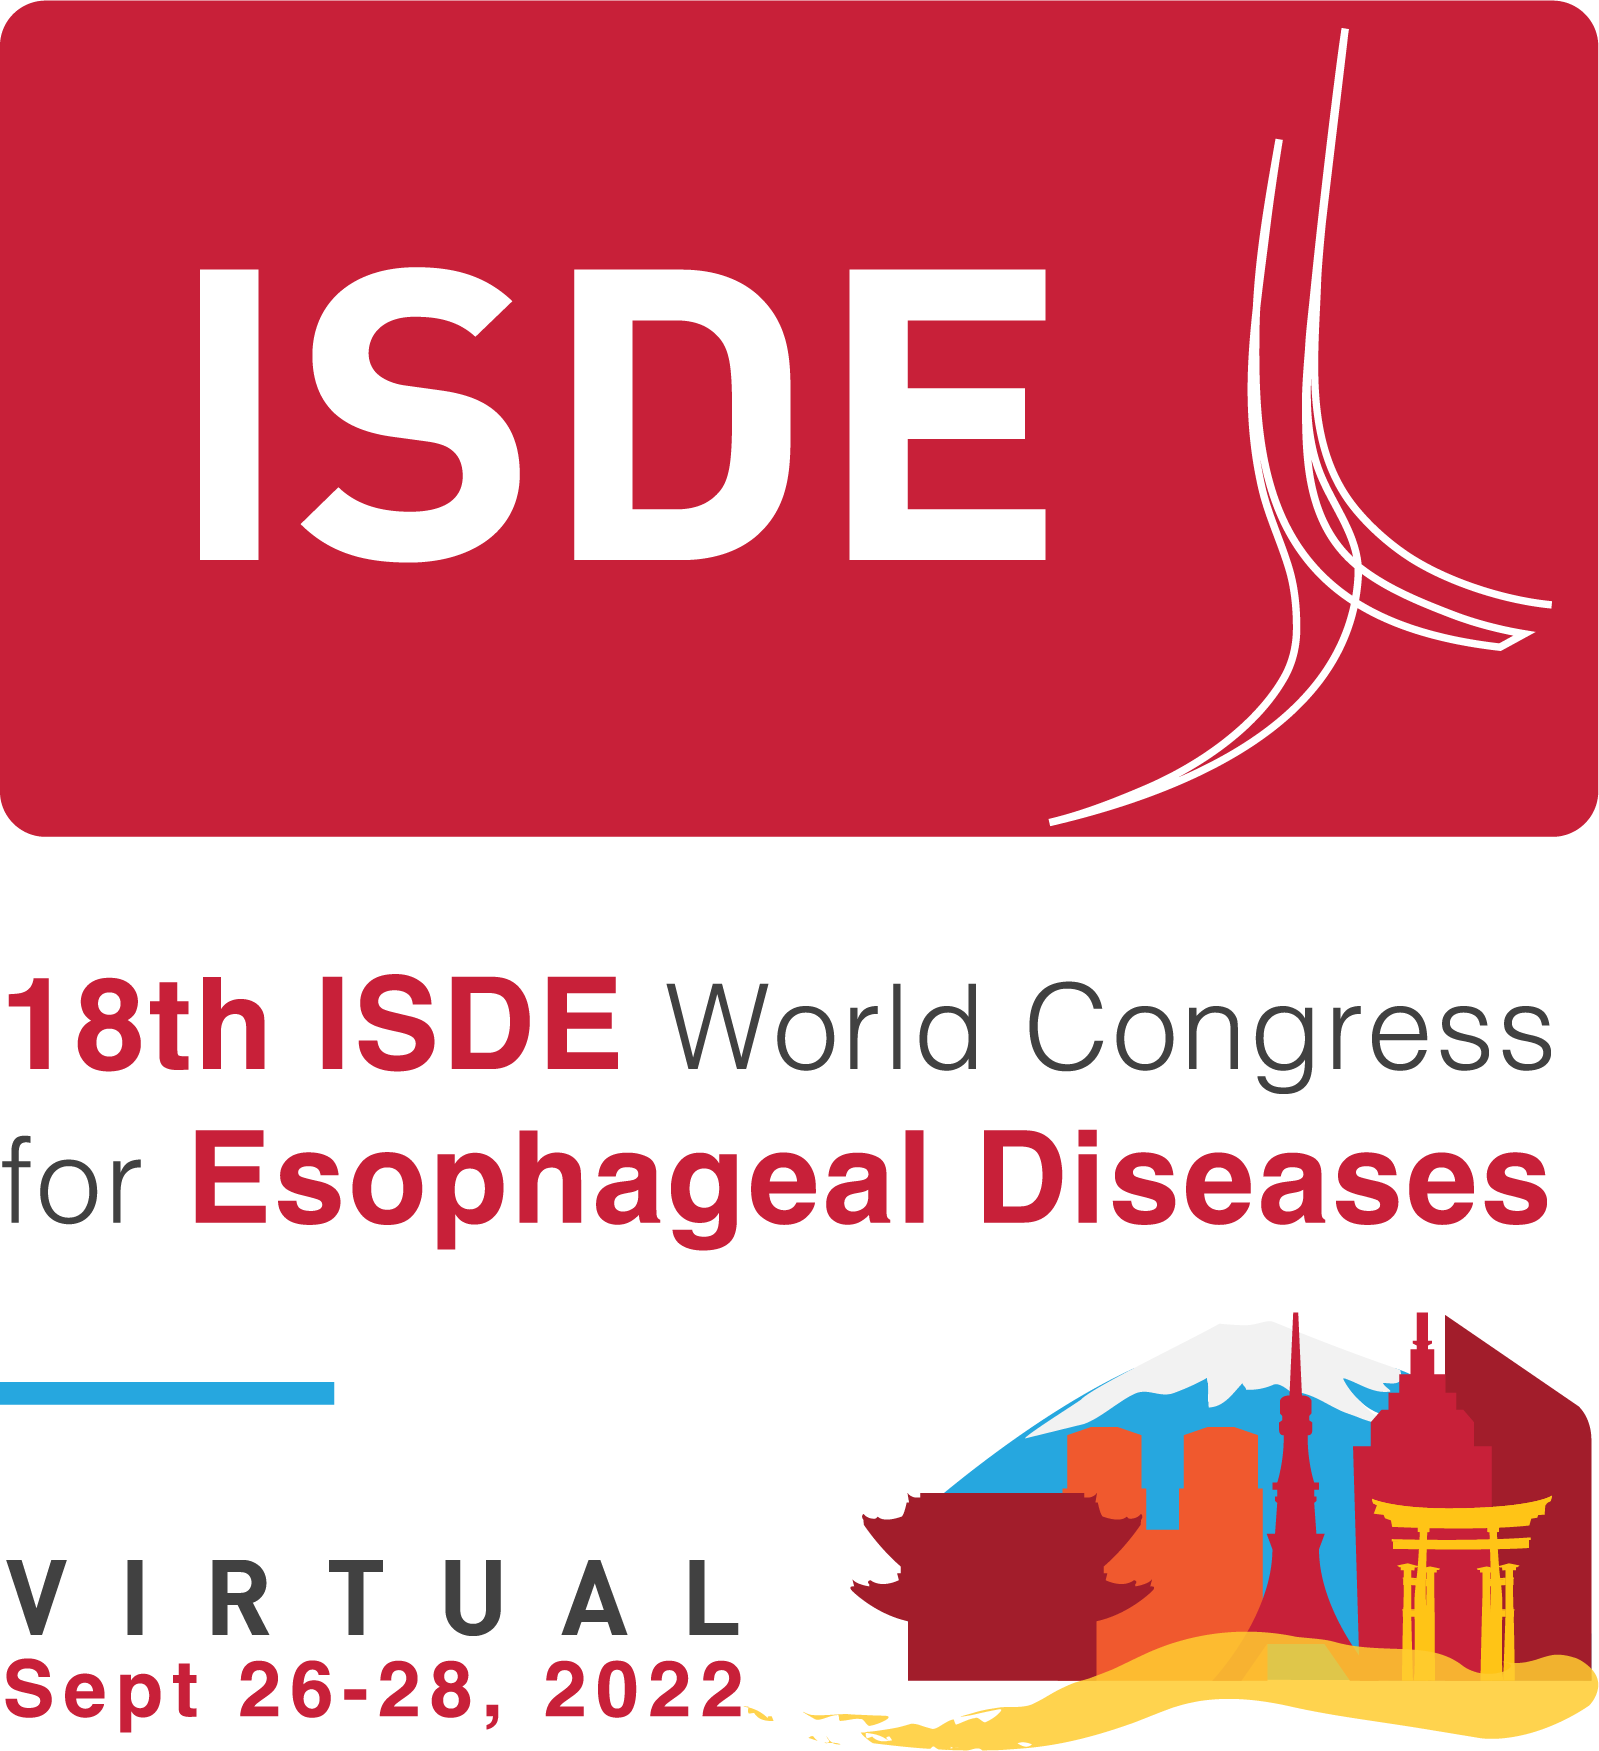 18th ISDE World Congress for Esophageal Diseases